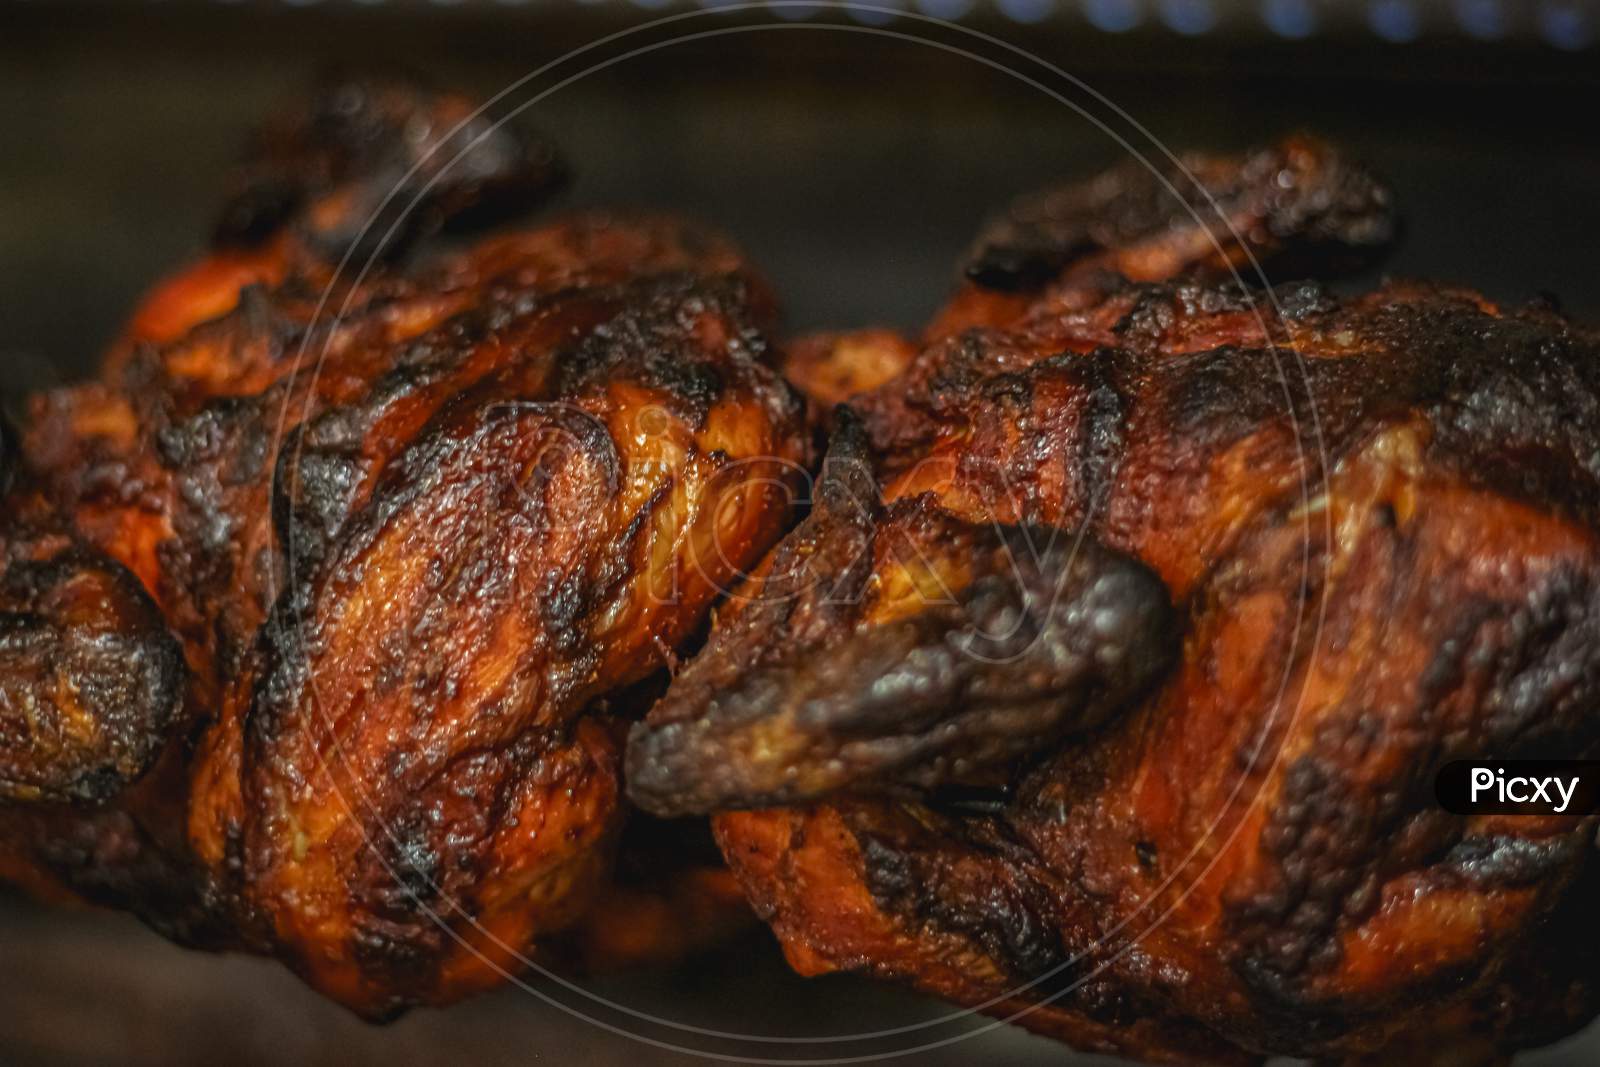 Grilled Chicken Over Open Fire . Closeup Grilled Chicken. Charred Rotisserie Chicken Over Open Flames In A Barbecue.